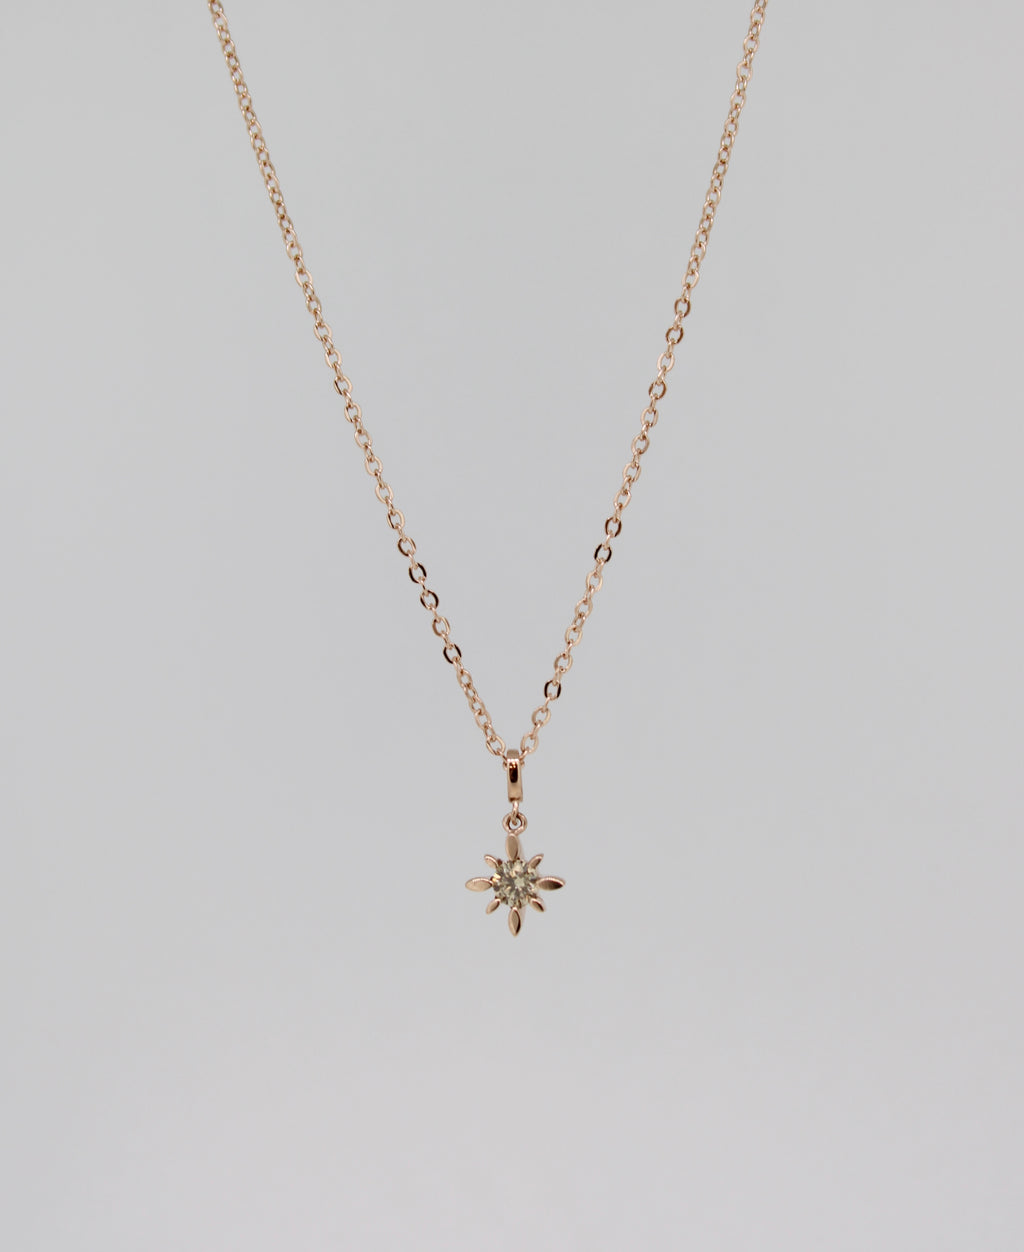 14k rose gold diamond star necklace by Brianne & Co.